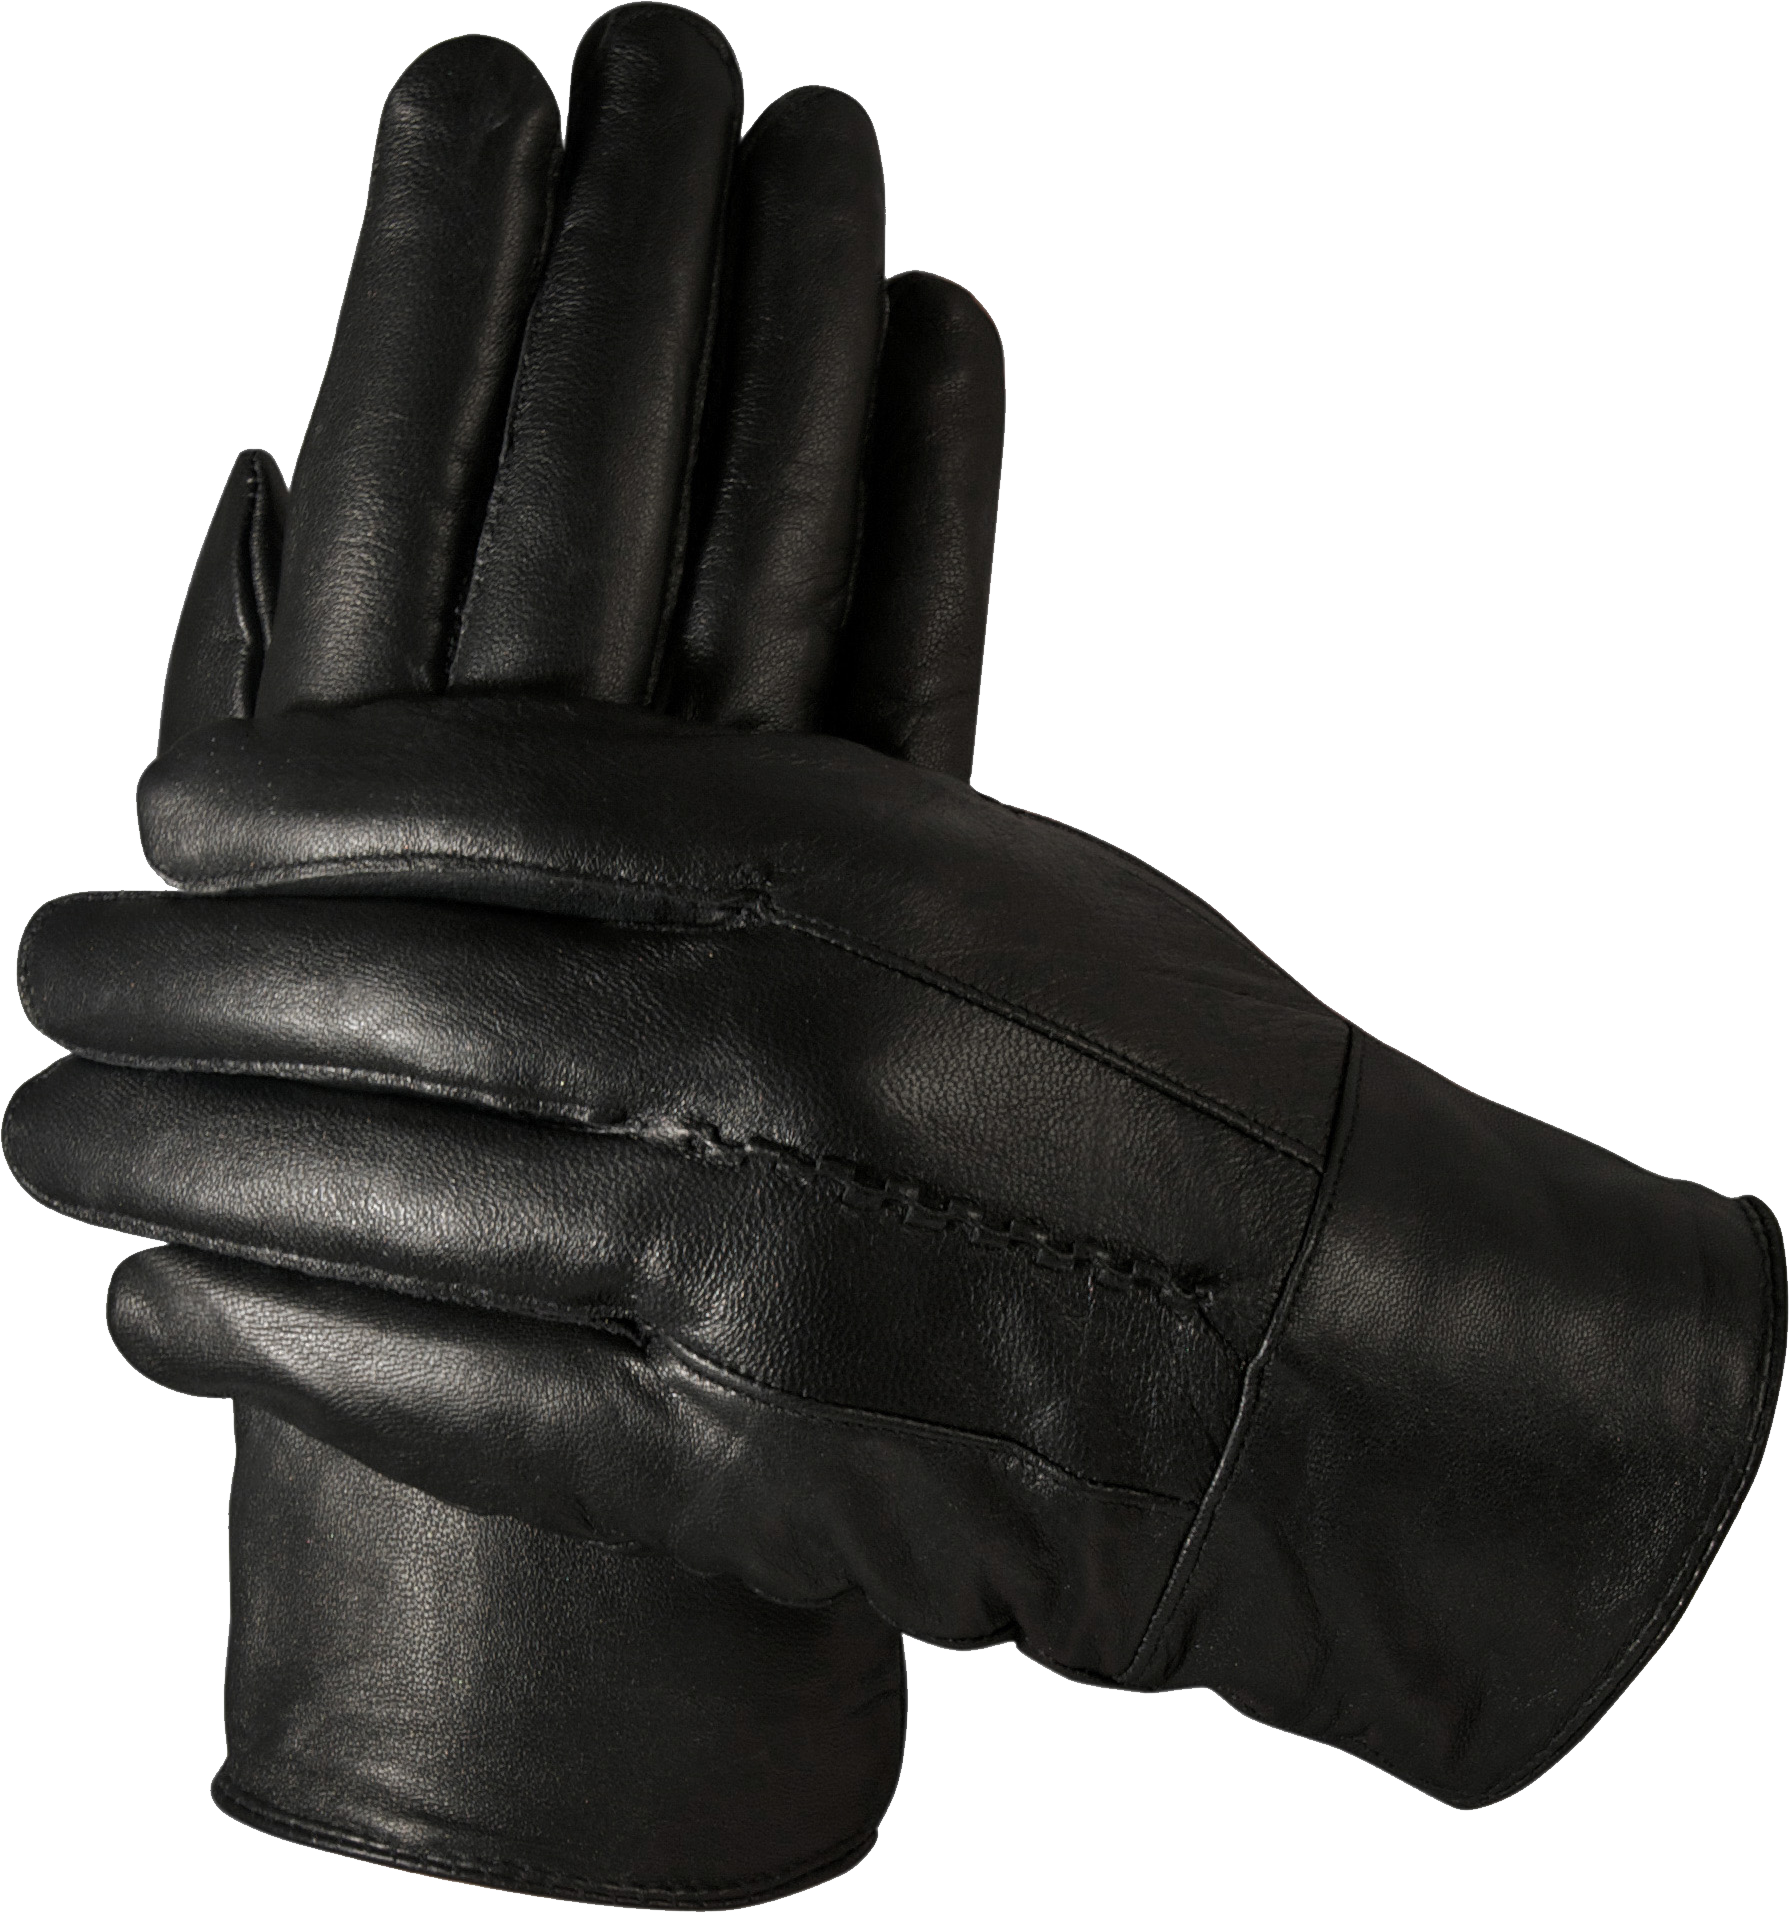 Leather gloves PNG image